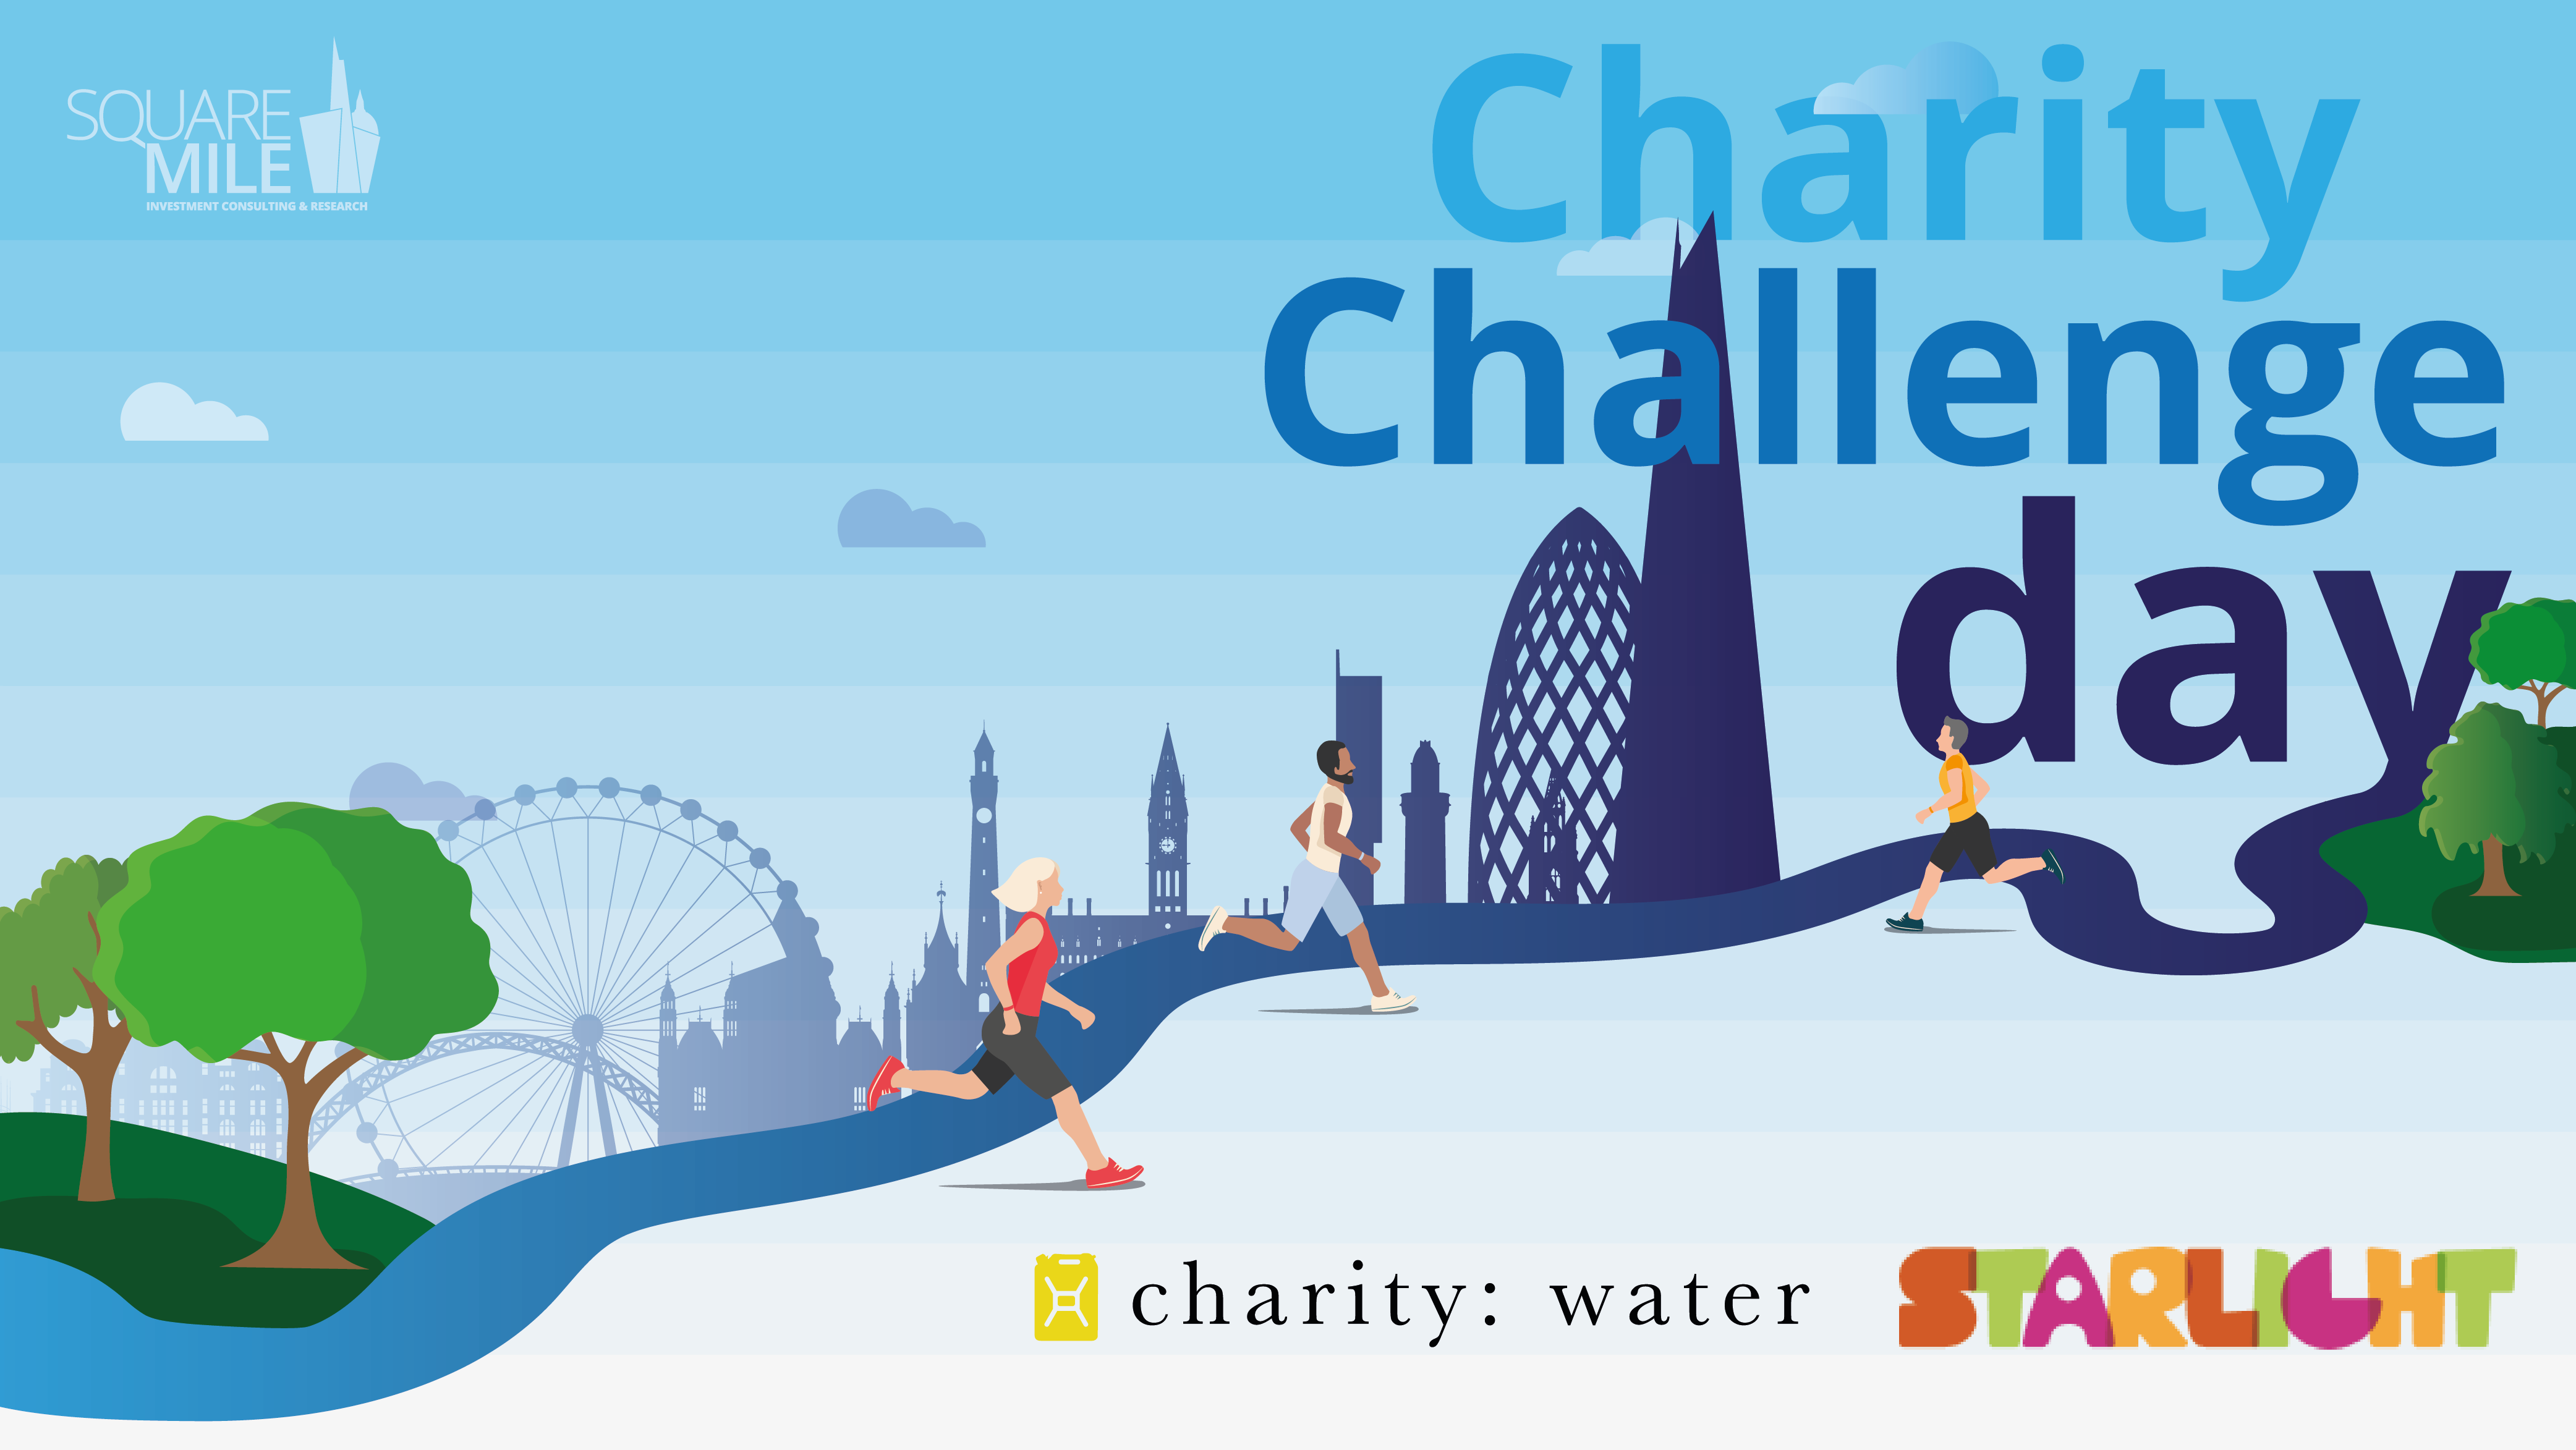 Square Mile Charity Challenge